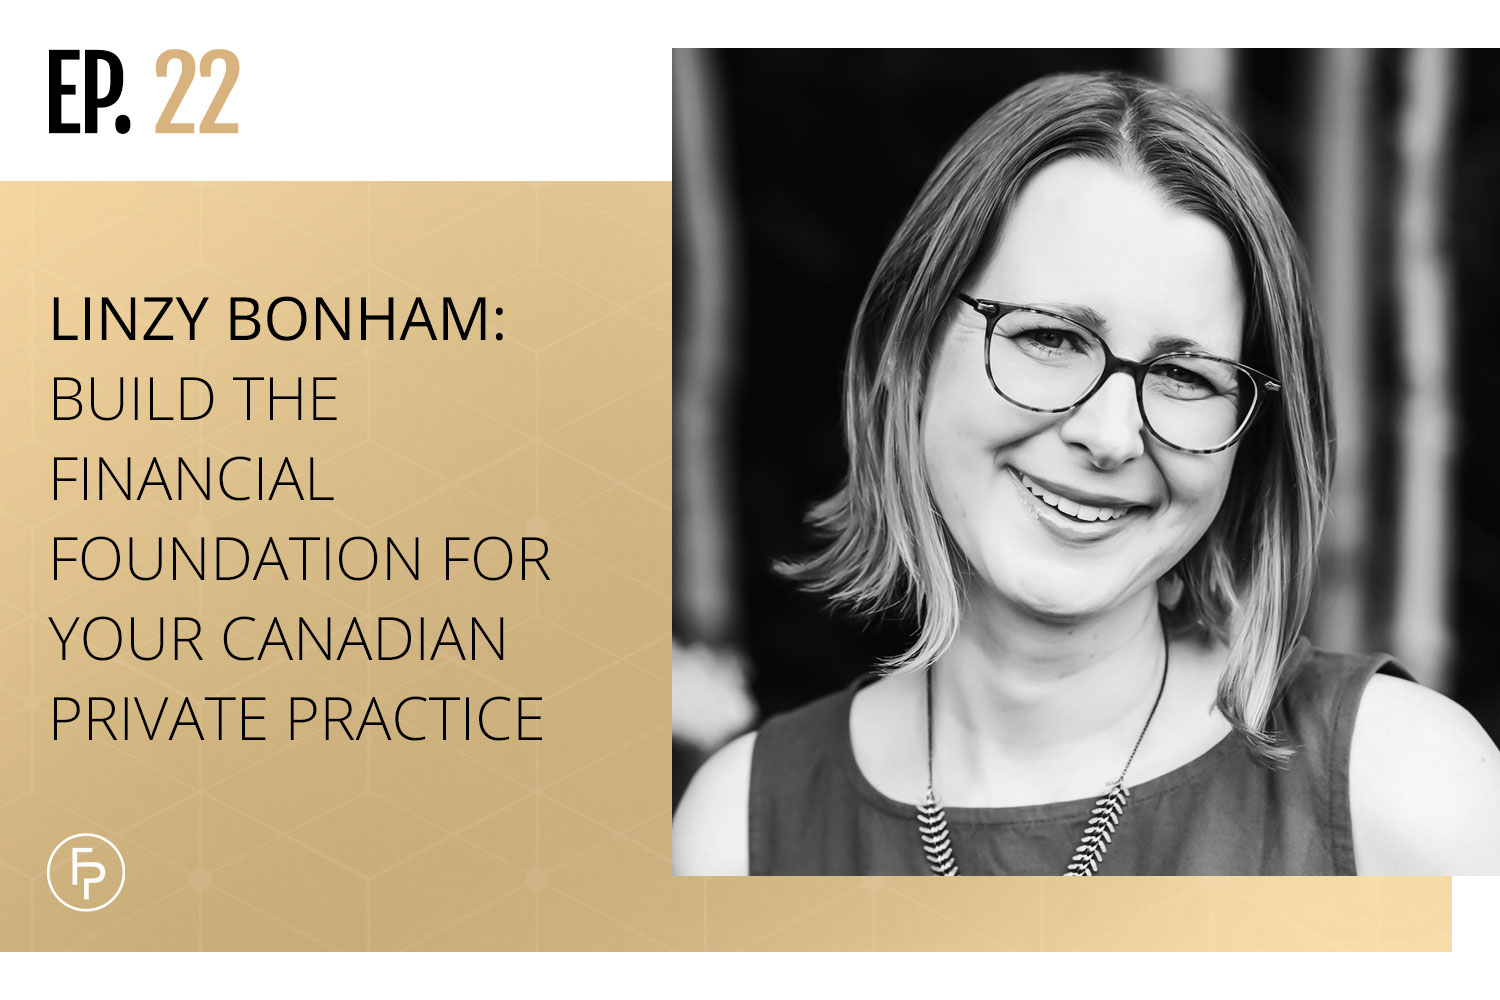 Linzy Bonham: Build the Financial Foundation for Your Canadian Private Practice| Ep 22